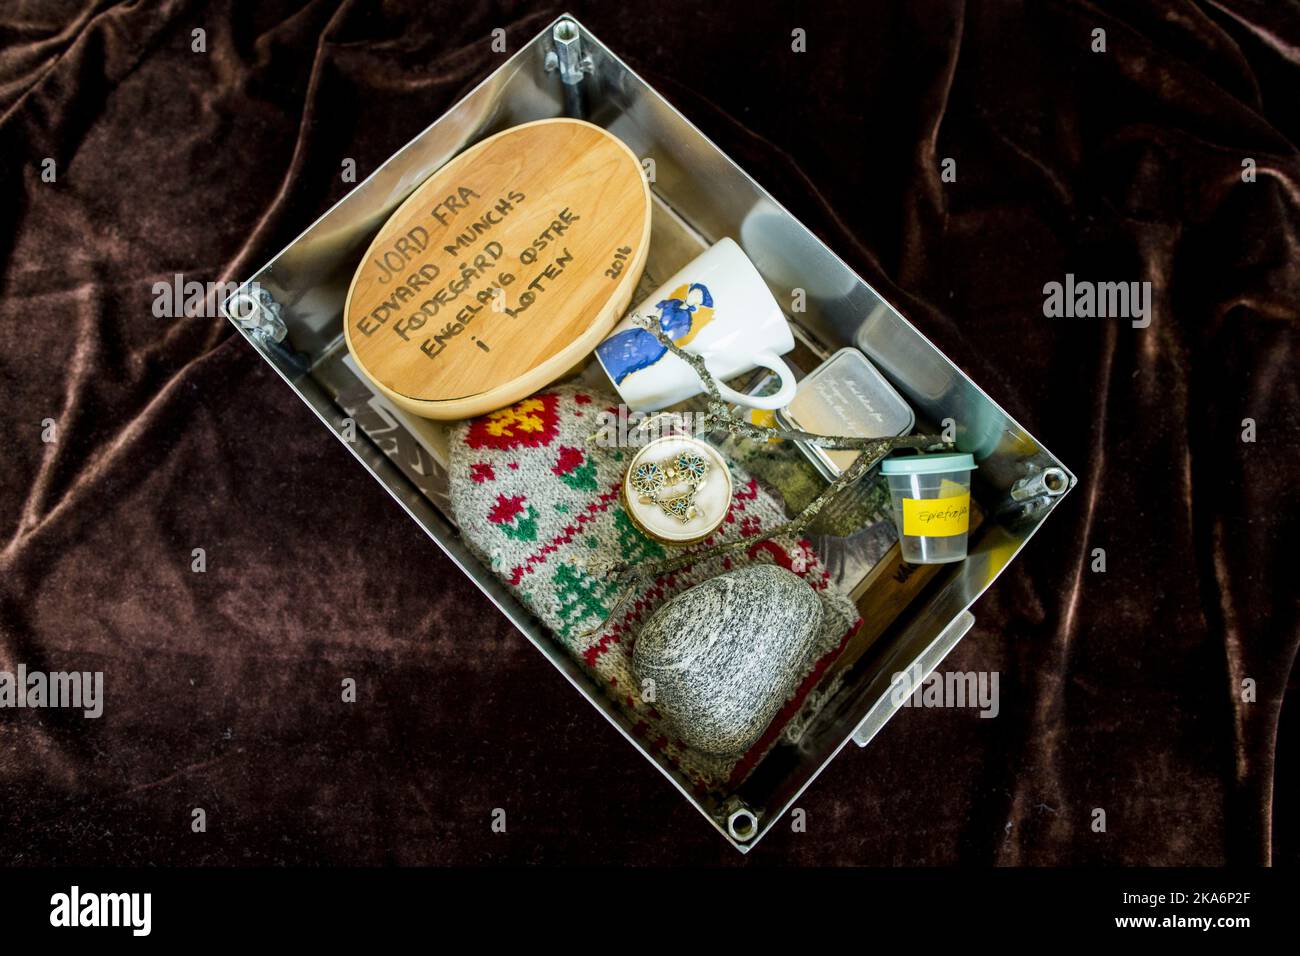 Oslo, Norway 20161013. Items from eight municipalities, which in various ways relates Edvard Munch to the objects, are collected in a box to be placed in the floor of the new Munch Museum 'Lambda' in Oslo. The foundation stone containesm mittens, a brooch, a stone, a cup. Photo: Vegard Wivestad Groett / NTB scanpix Stock Photo